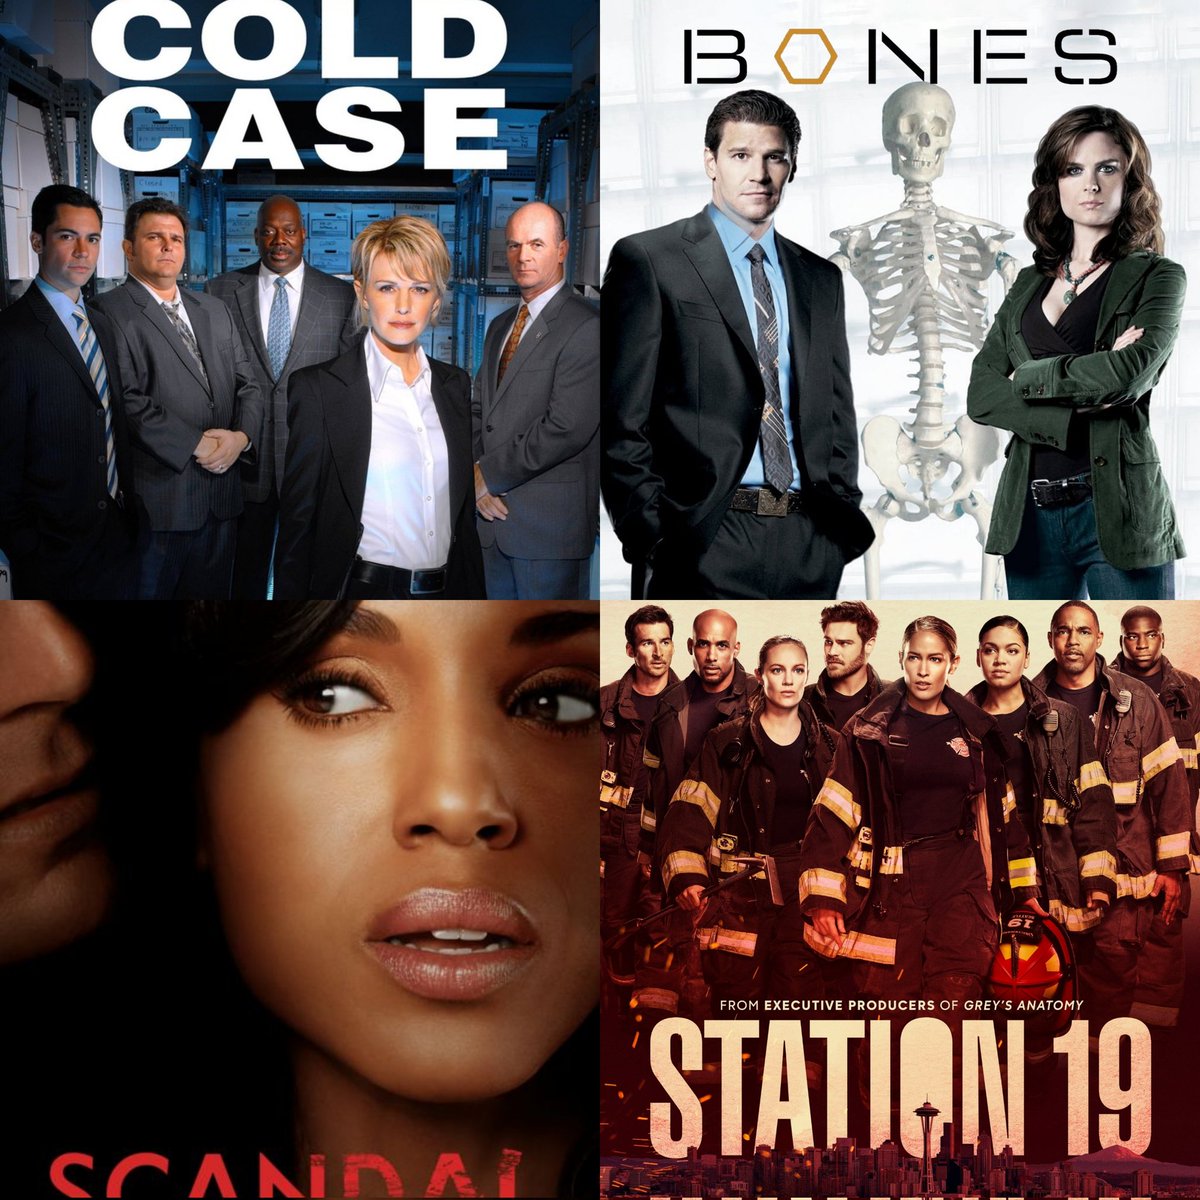 here are my favorite eight tv shows of all time. what are yours?